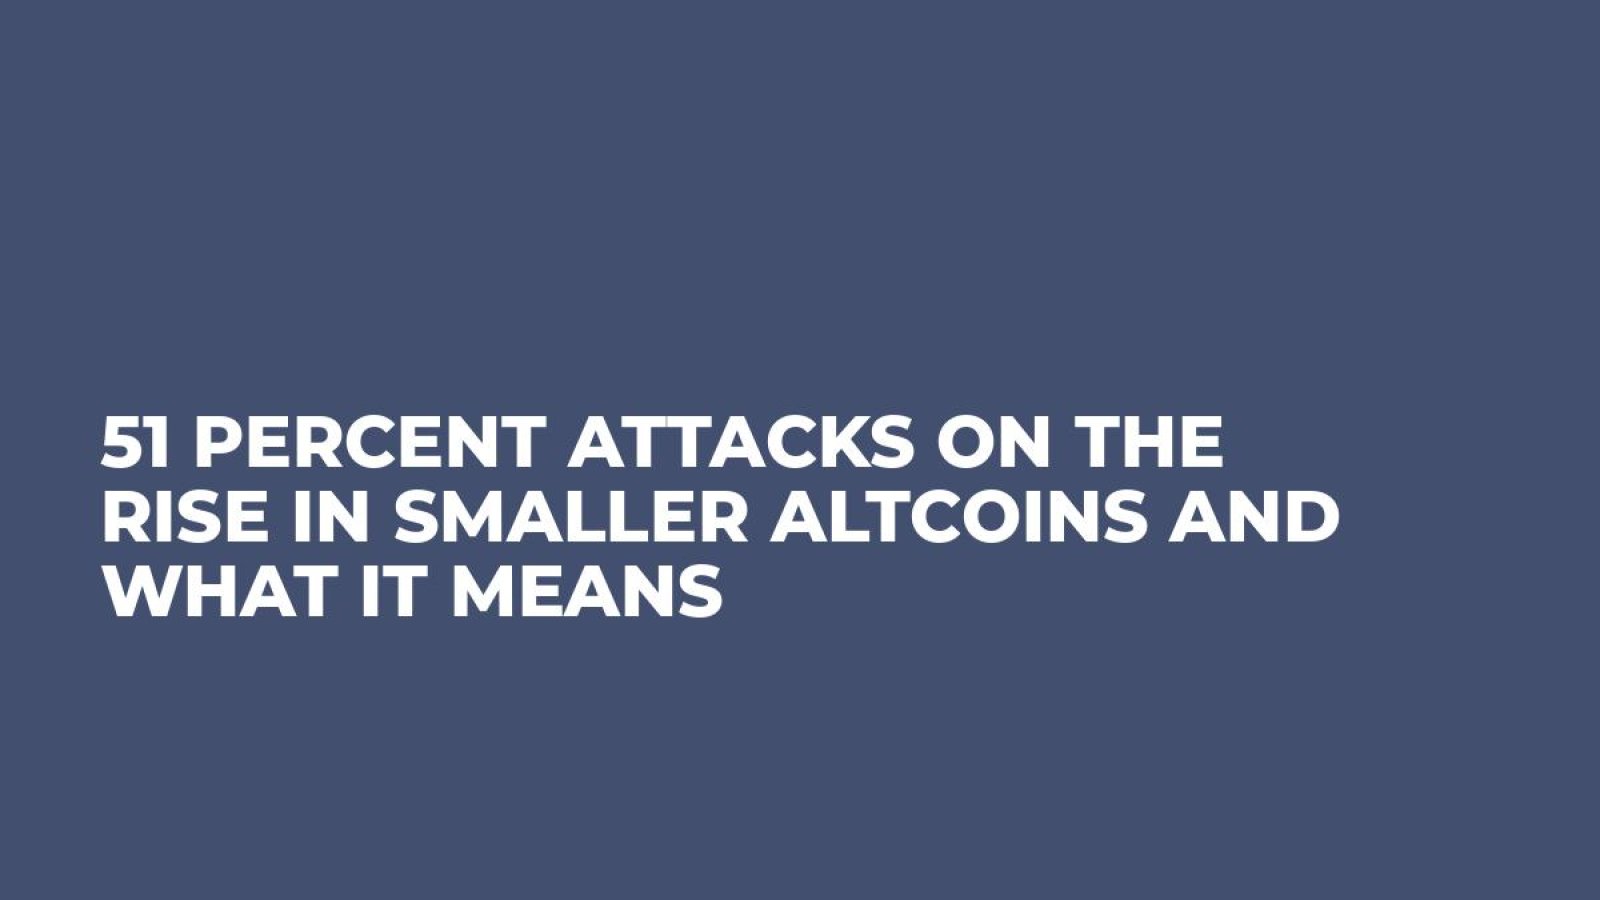 51 Percent Attacks on the Rise in Smaller Altcoins and What it Means